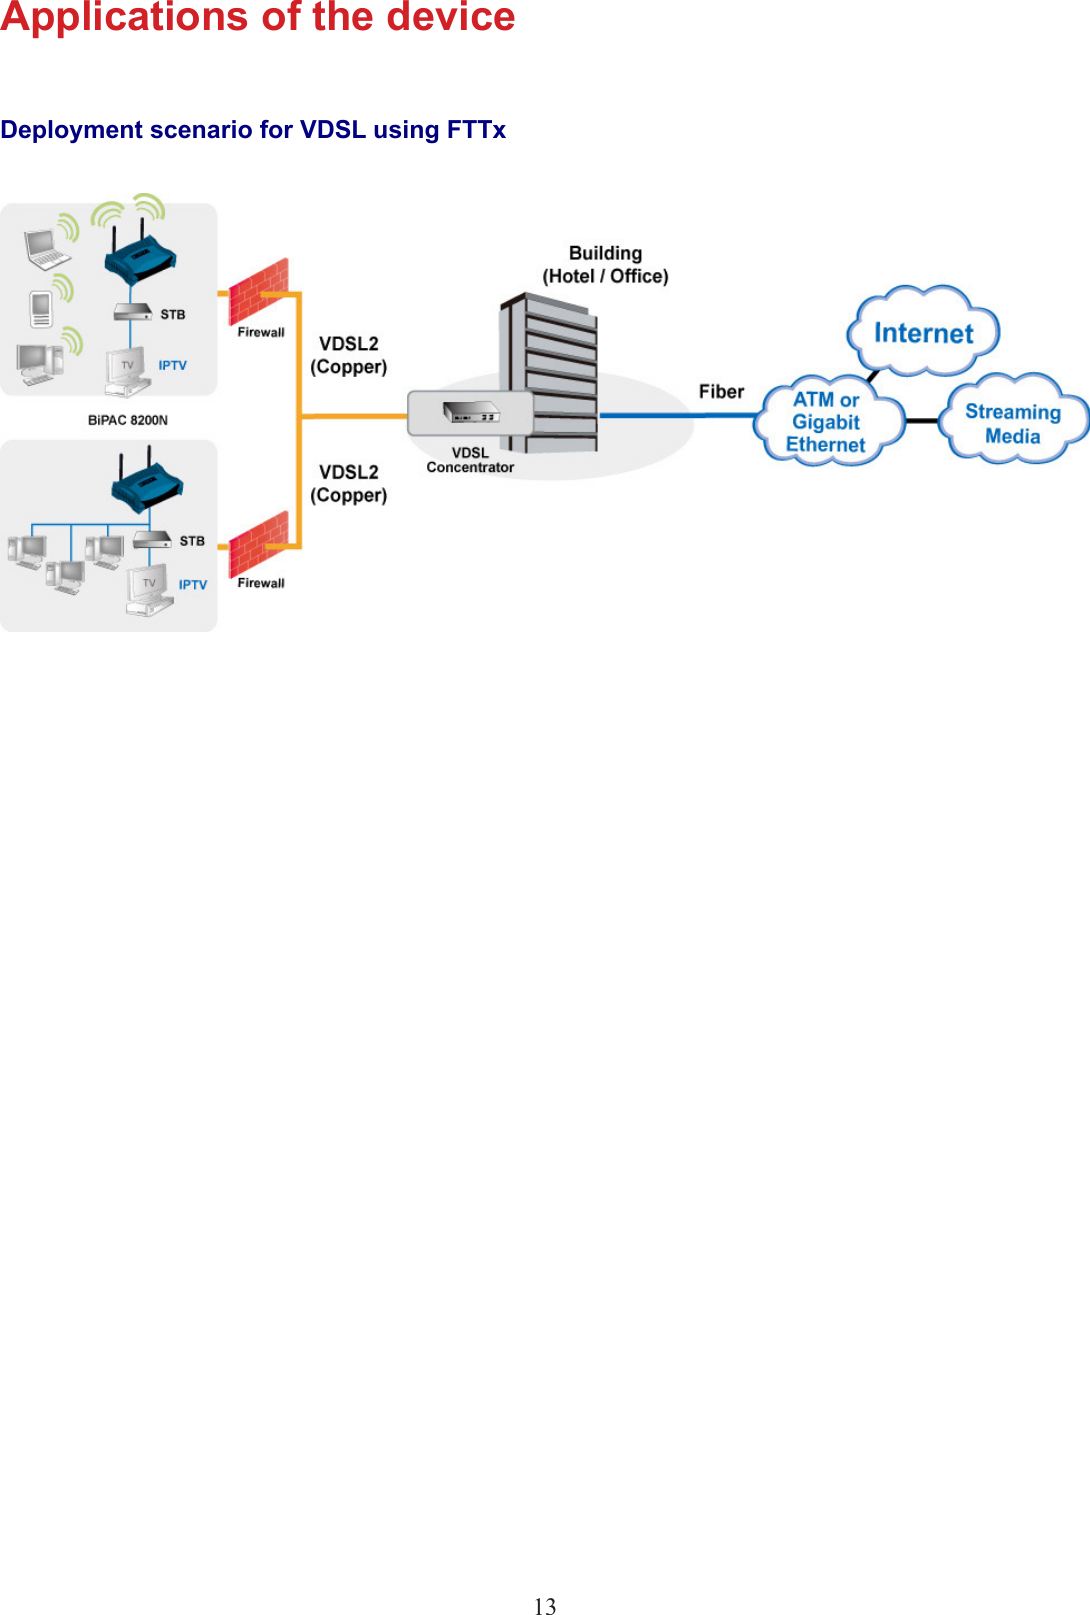 13Applications of the deviceDeployment scenario for VDSL using FTTx